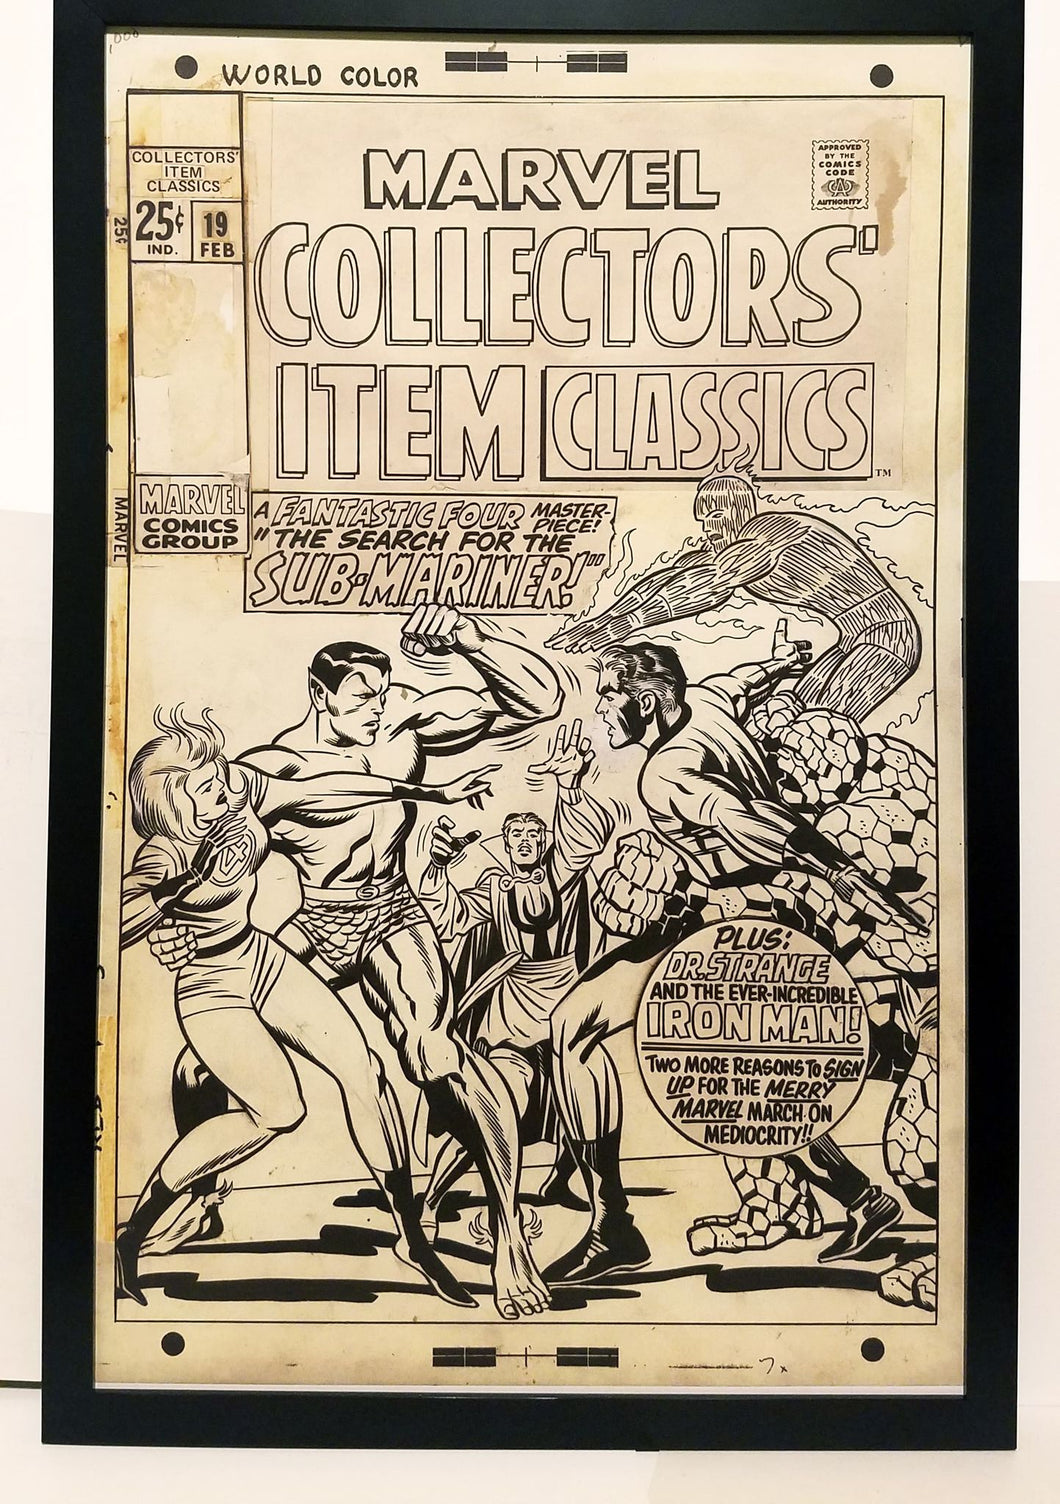 Marvel Collector's Item Classics #19 by Jack Kirby 11x17 FRAMED Original Art Poster